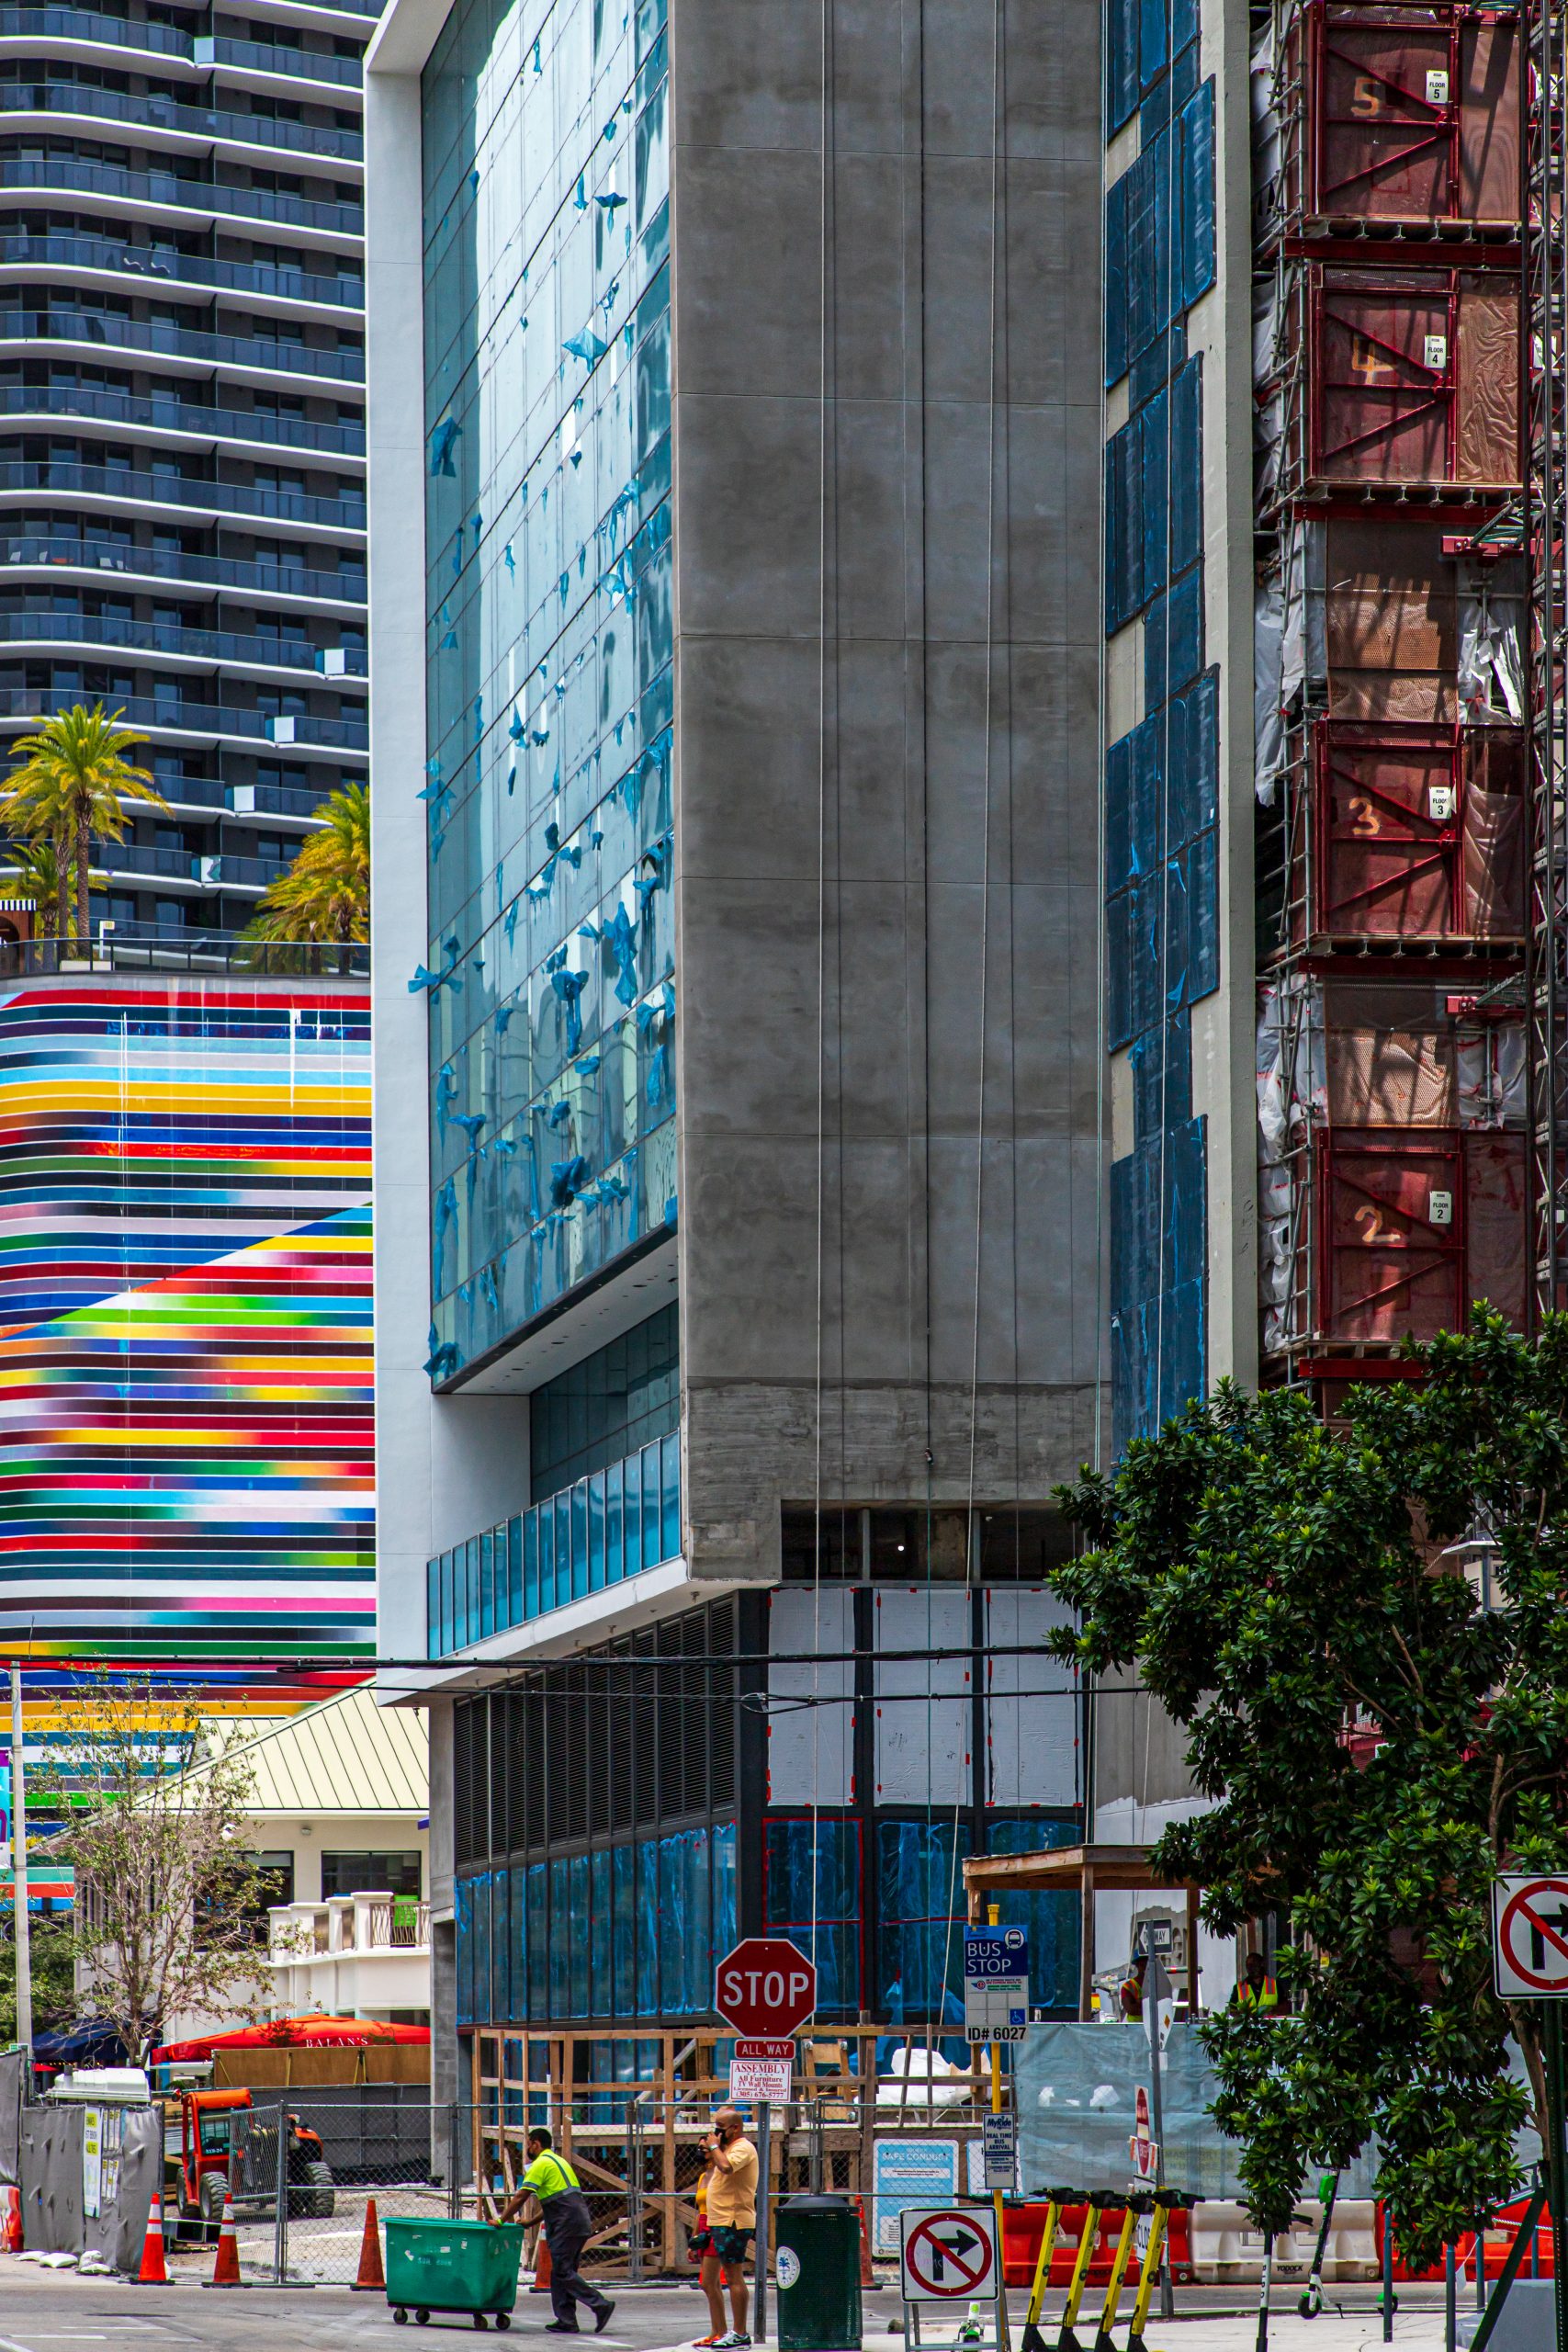 CitizenM Brickell. Photo by Skyalign.